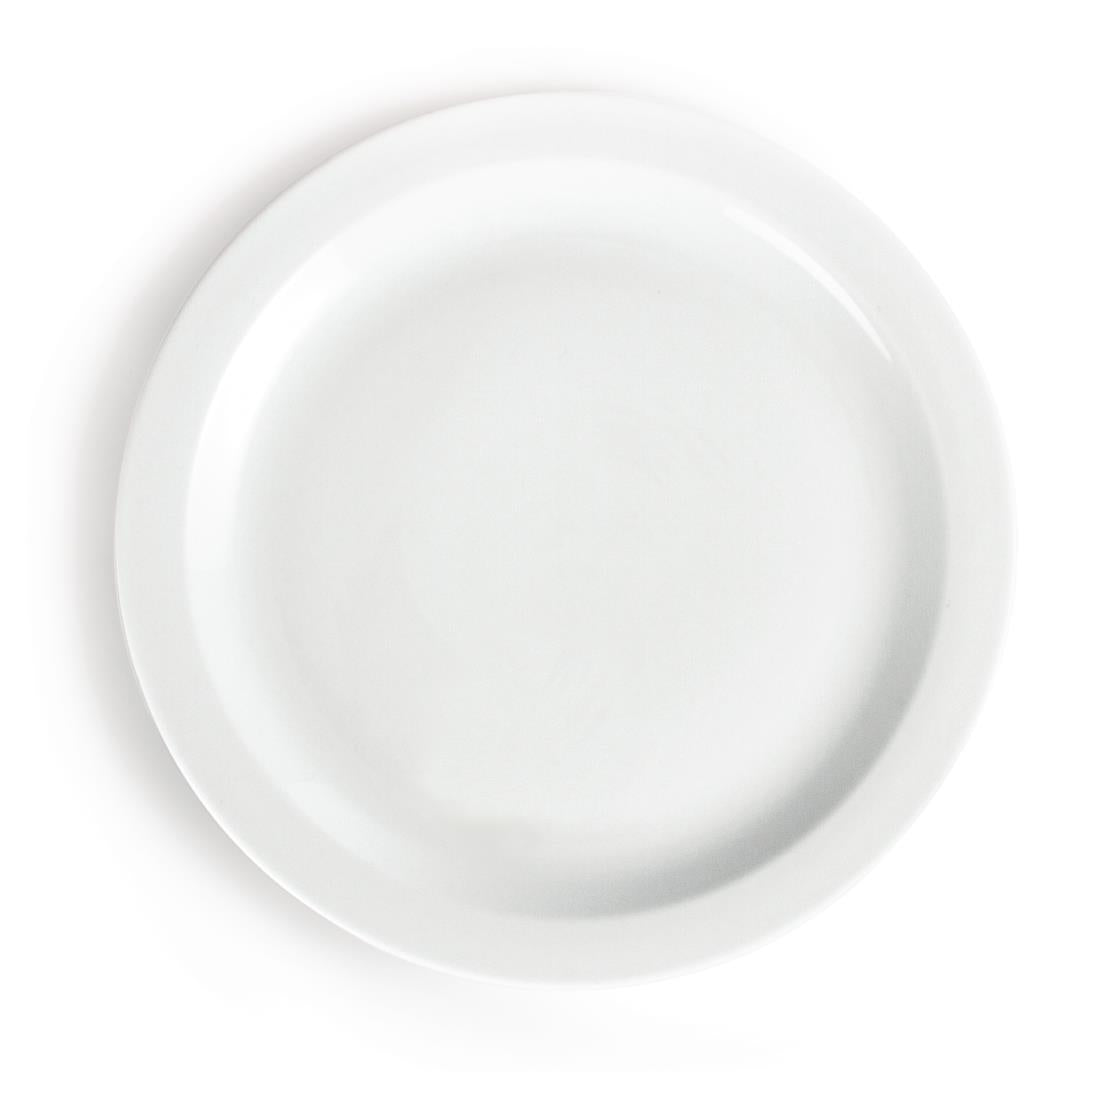 CB491 Olympia Whiteware Narrow Rimmed Plates 280mm (Pack of 6)